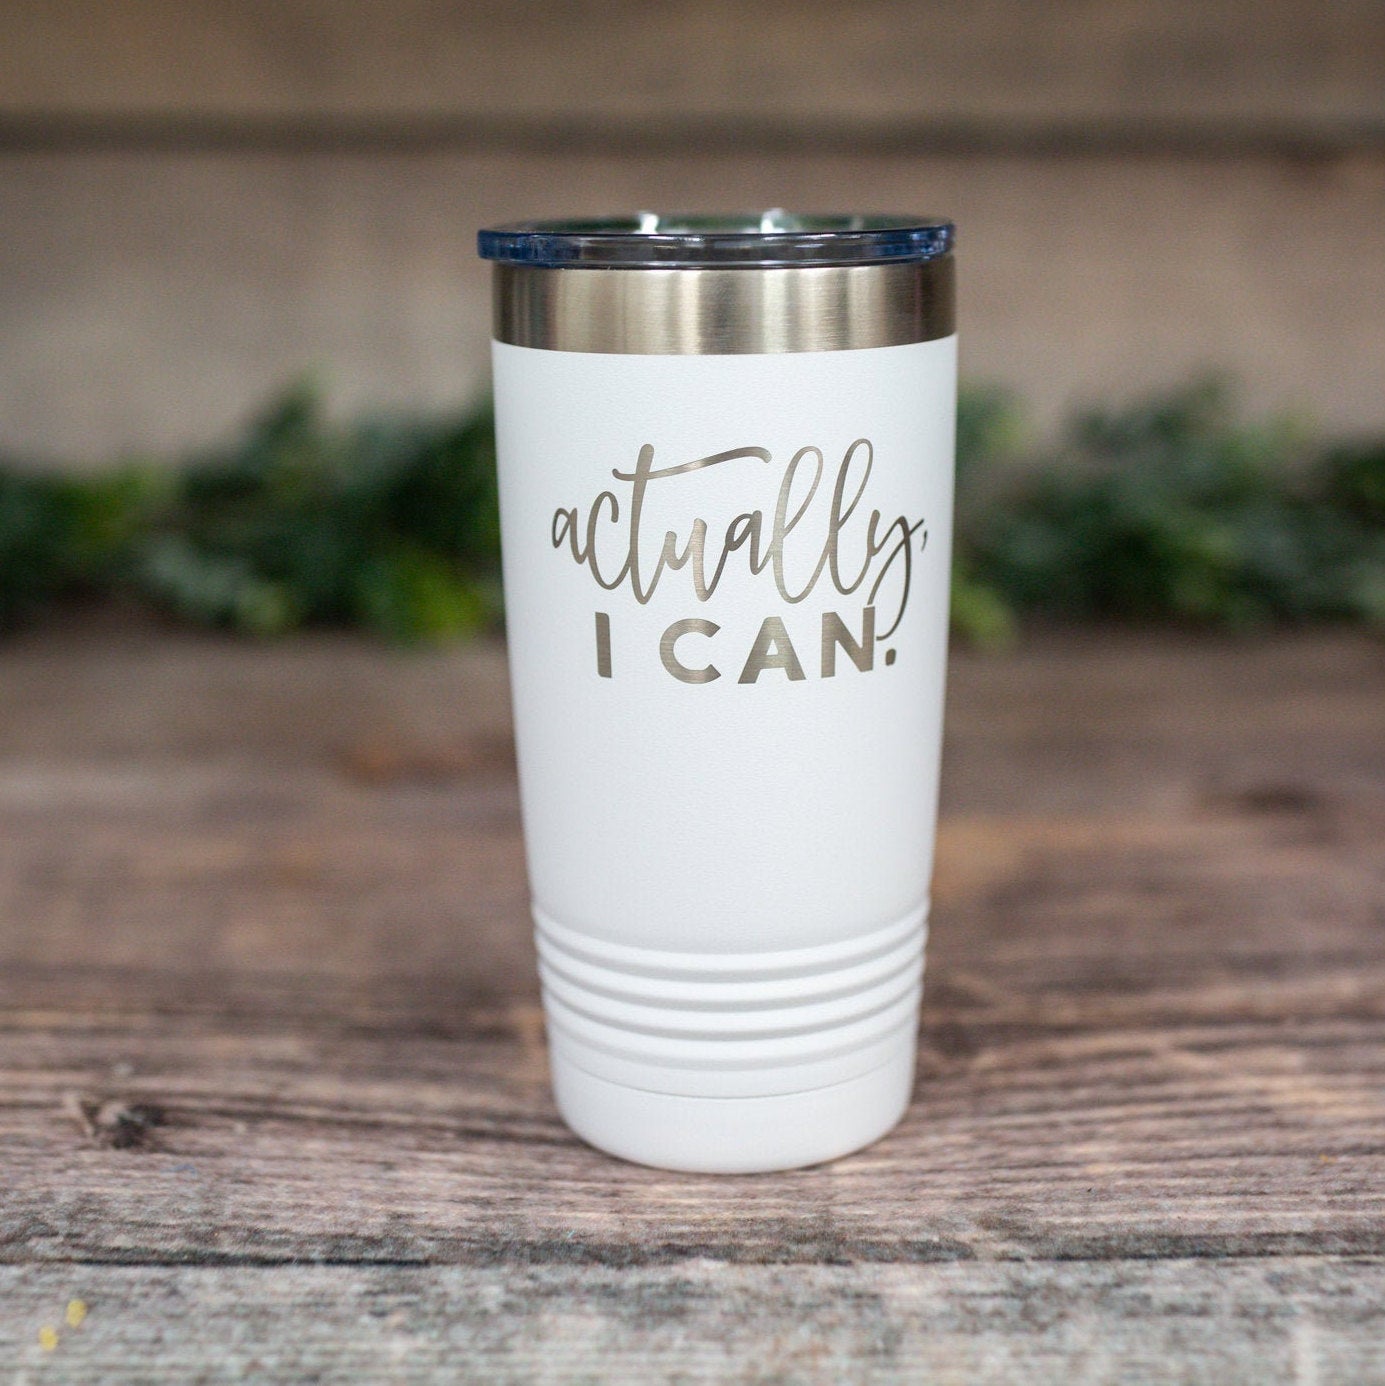 https://3cetching.com/wp-content/uploads/2021/07/actually-i-can-engraved-travel-tumbler-for-her-personalized-travel-mug-motivational-gift-mug-60f74bdf.jpg